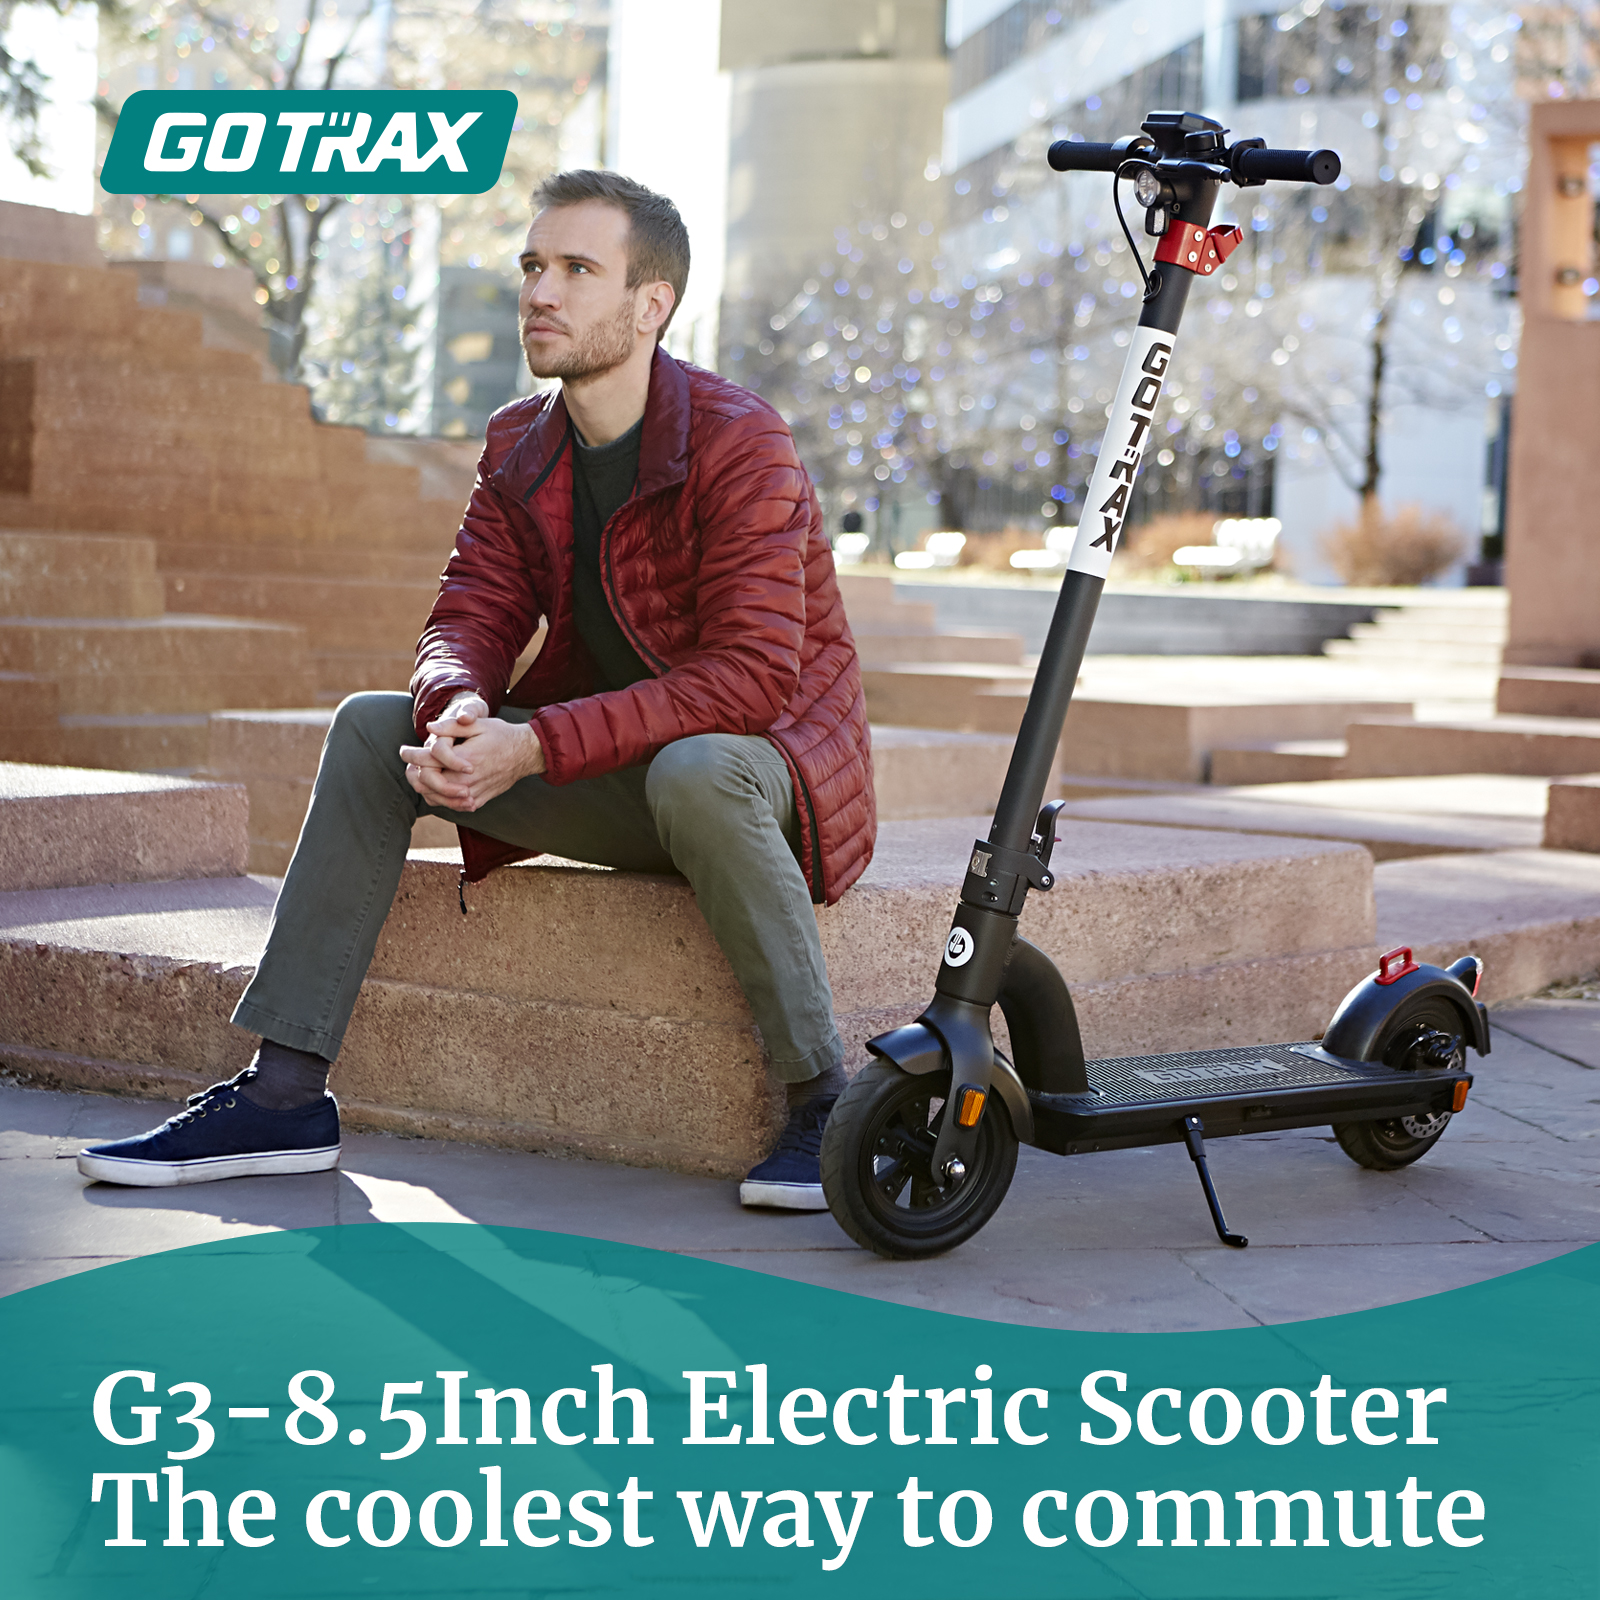 GOTRAX G3 Electric Scooter, 8.5" Pneumatic Tires, Max 18mile Range and 15.5Mph Power by 350W Motor, Foldable Escooter for Adult Unisex,Black - image 3 of 9